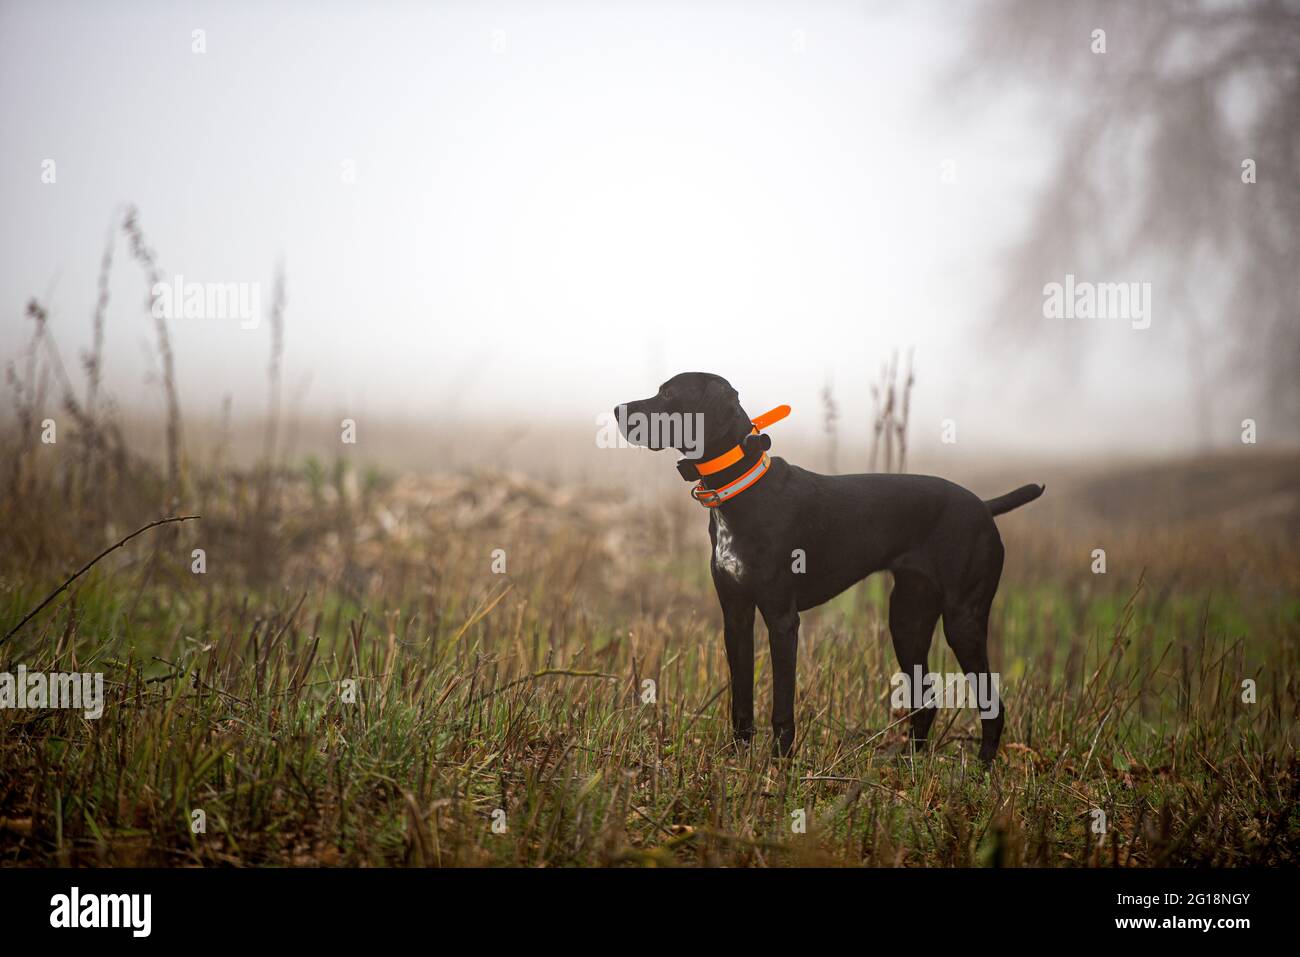 A hunting dog in a field on a foggy morning standing profile to the camera looking away. Stock Photo